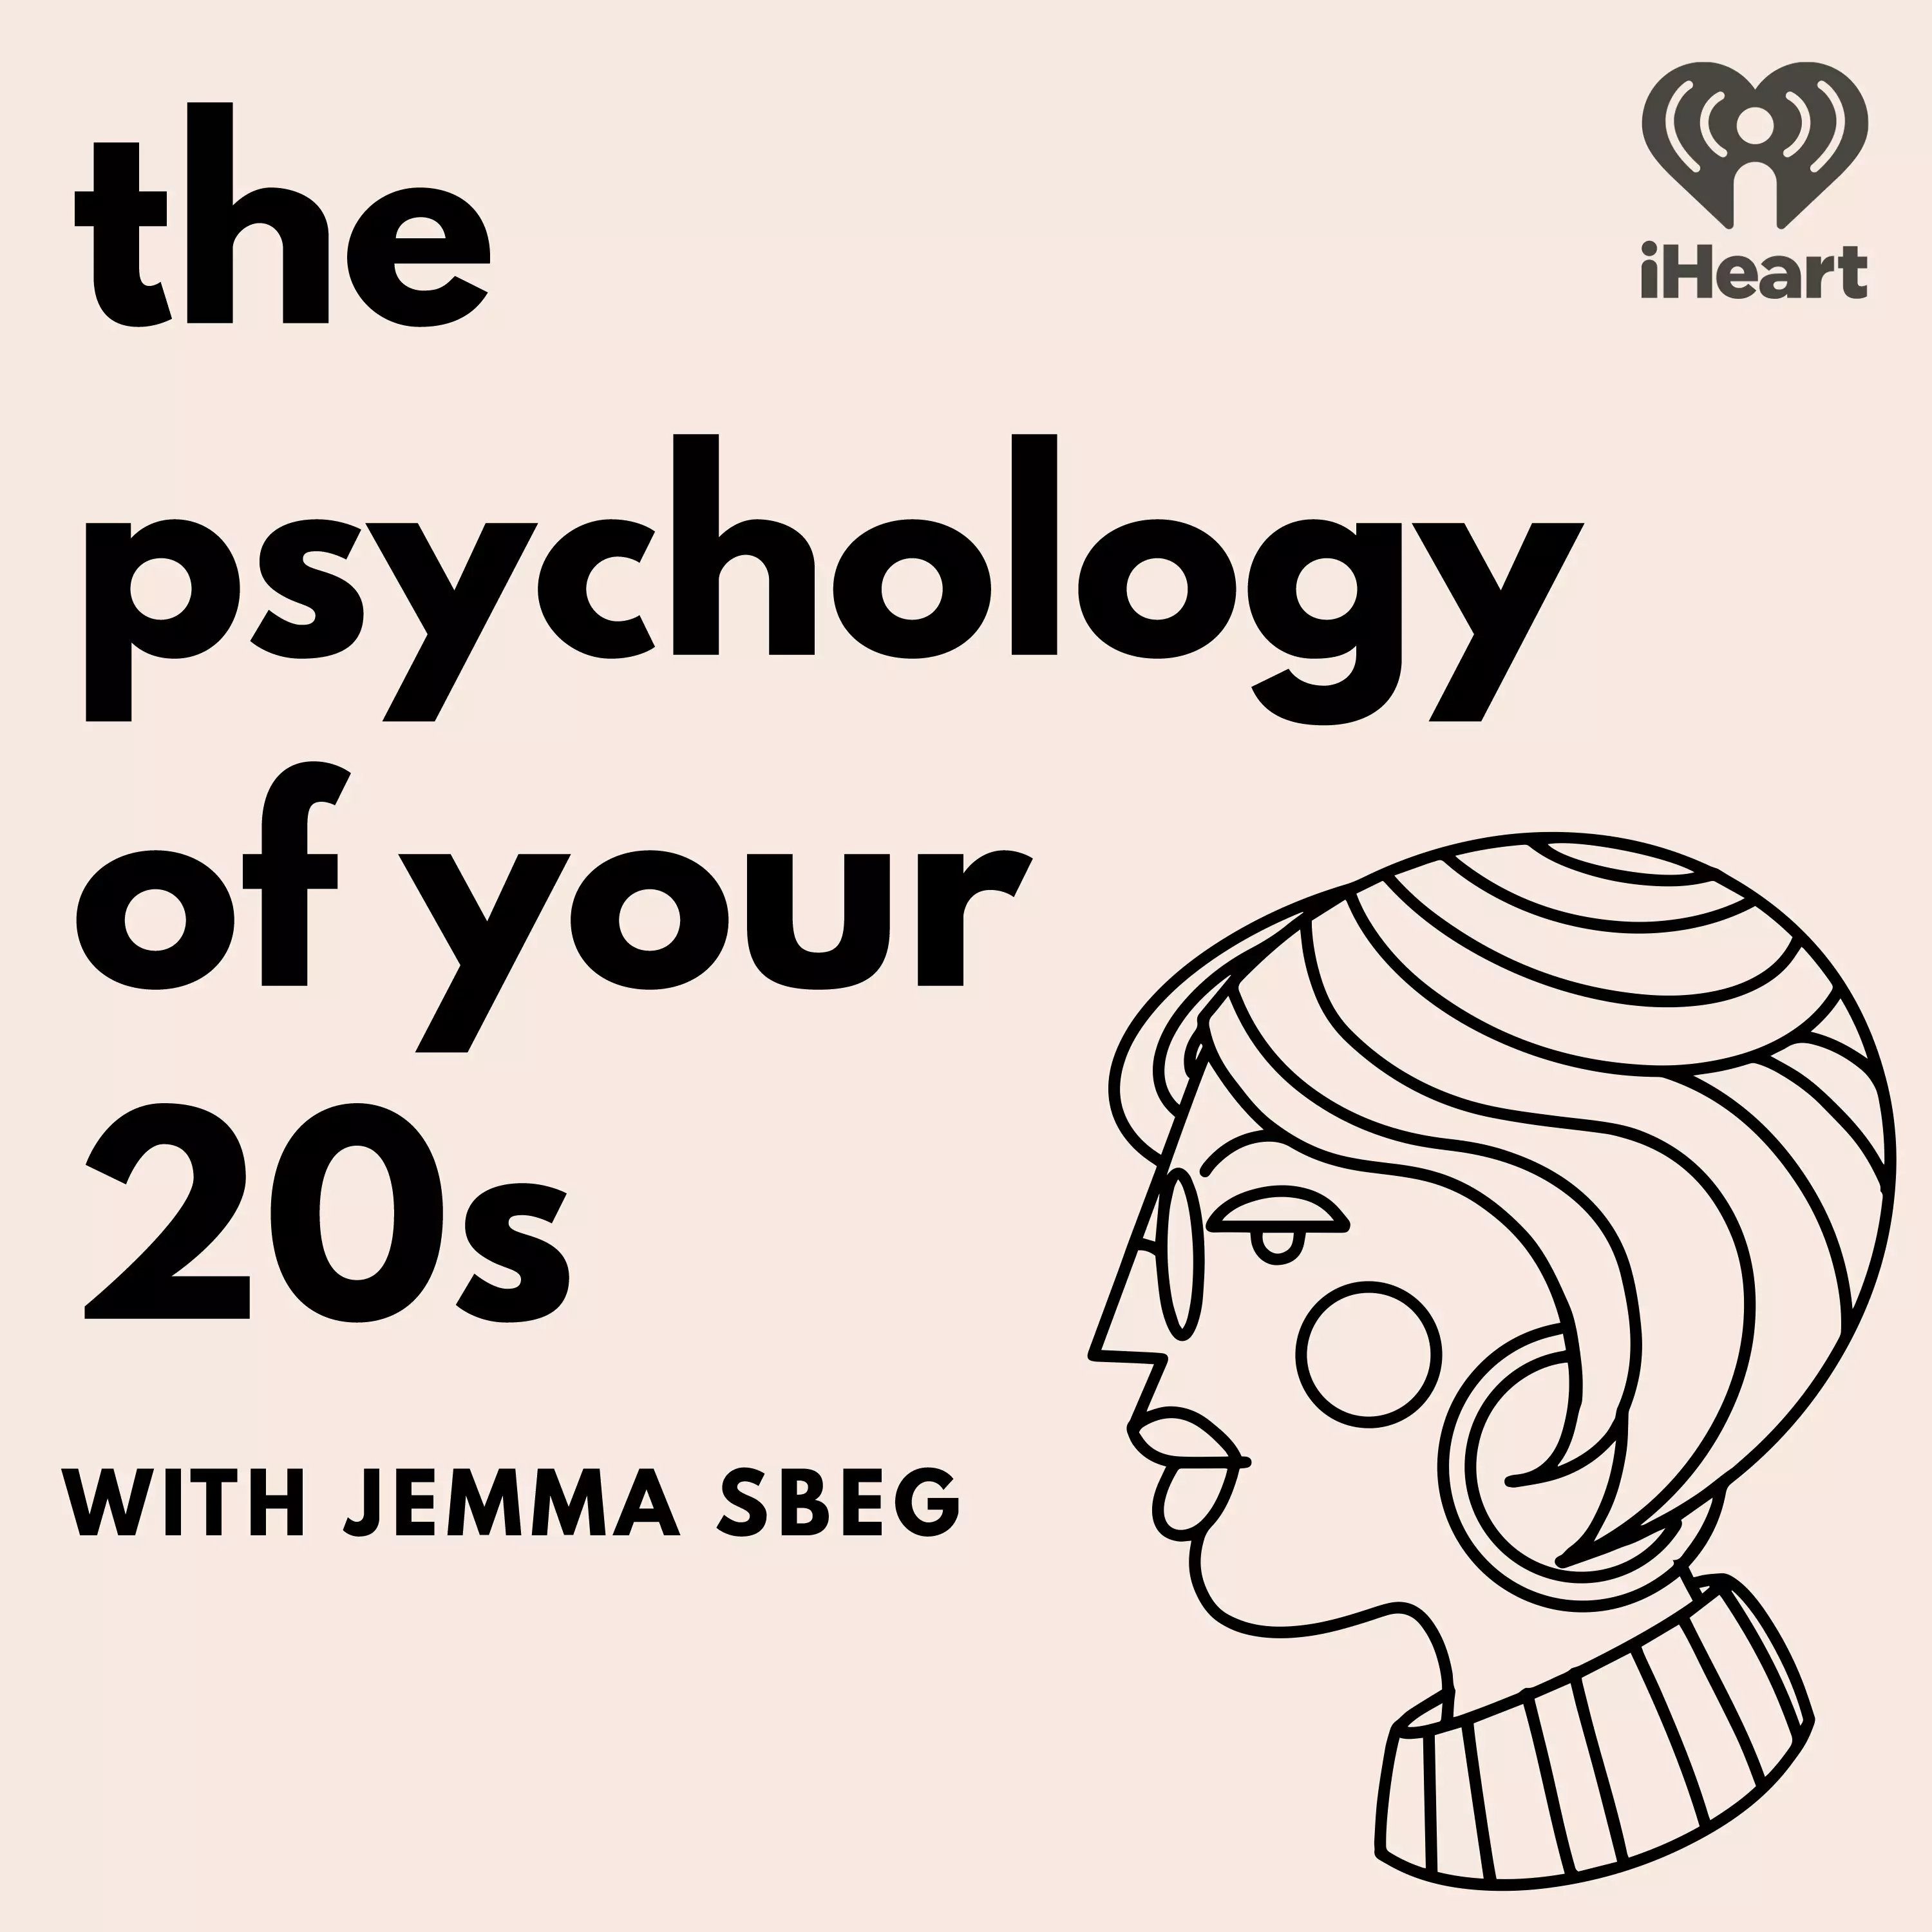 Podcast art for "The Psychology of Your 20s with Jemma Sbeg"